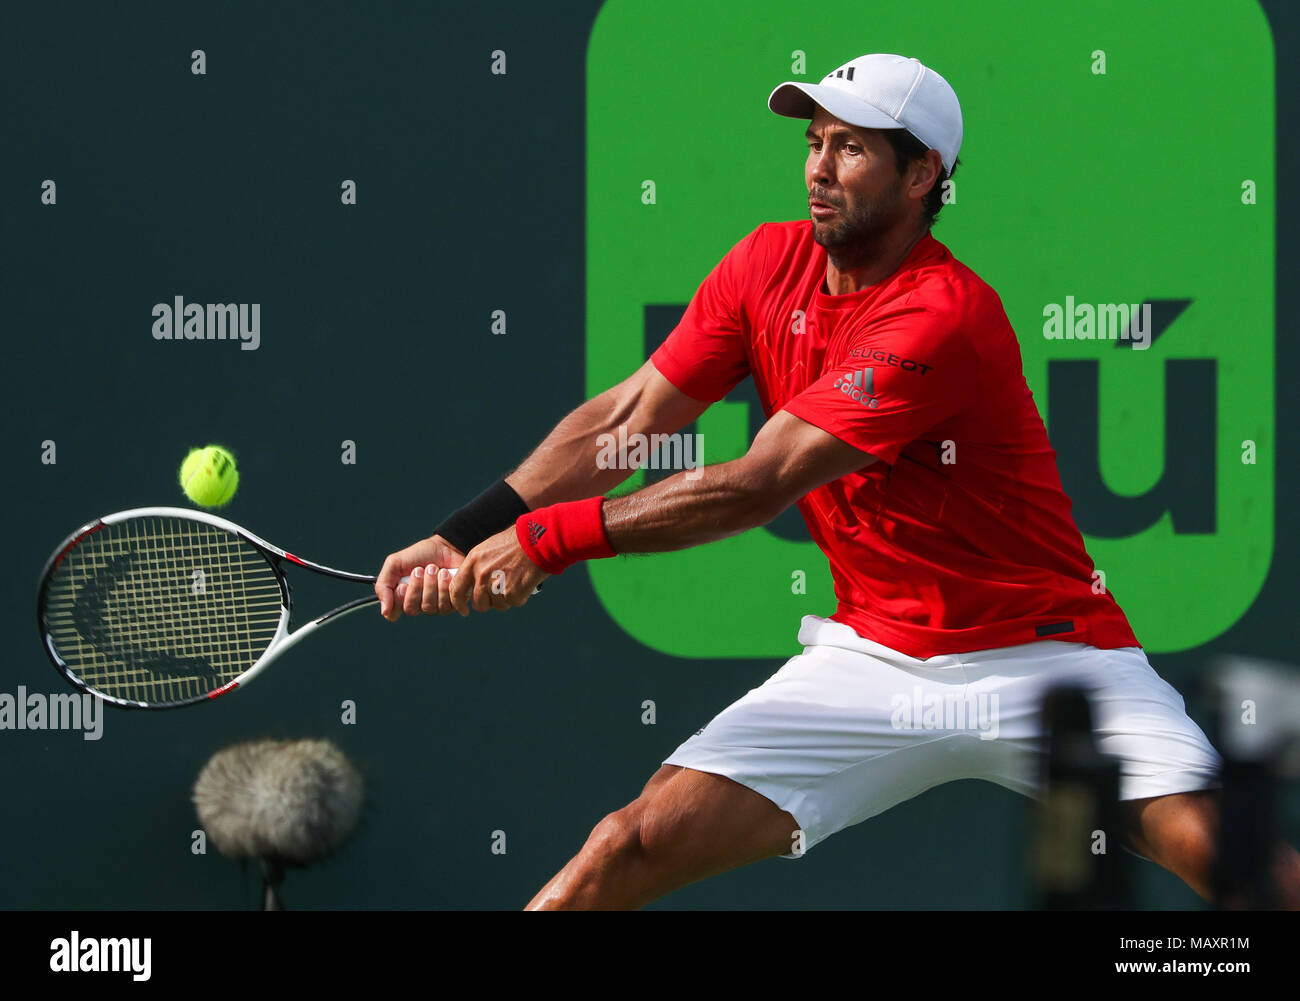 Key Biscayne, Florida, USA. 27th Mar, 2018. Fernando Verdasco of Spain plays a backhand against Pablo Carreno Busta of Spain during a fourth round match of the 2018 Miami Open presented by Itau professional tennis tournament, played at the Crandon Park Tennis Center in Key Biscayne, Florida, USA. Mario Houben/CSM/Alamy Live News Stock Photo